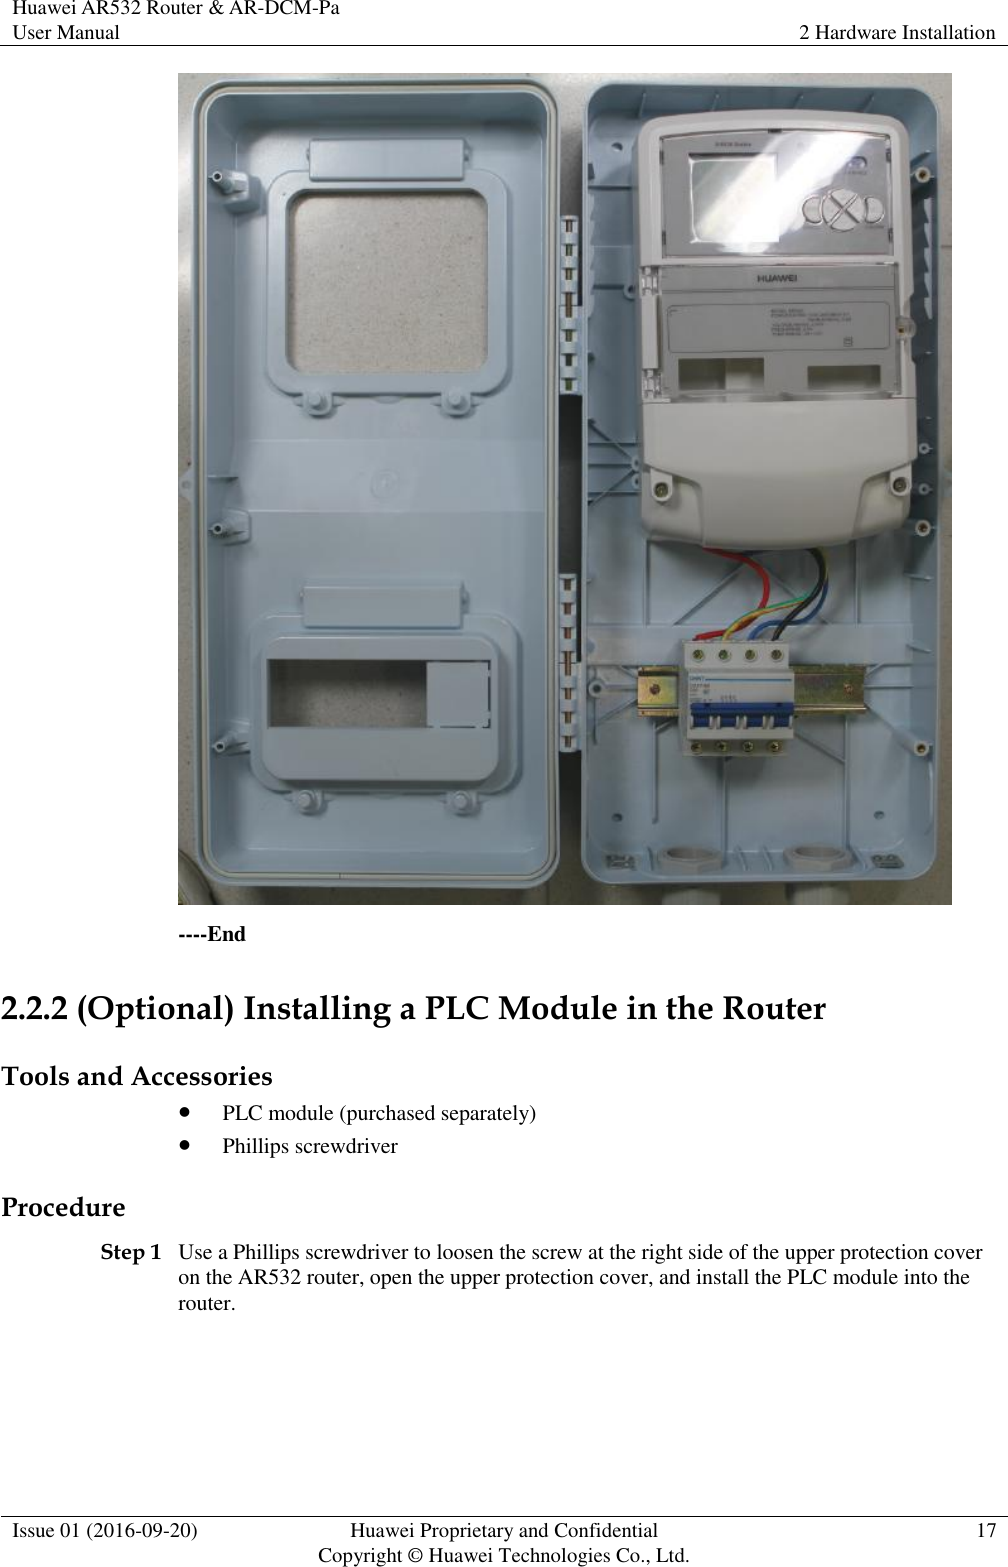 Huawei AR532 Router &amp; AR-DCM-Pa User Manual 2 Hardware Installation  Issue 01 (2016-09-20) Huawei Proprietary and Confidential                                     Copyright © Huawei Technologies Co., Ltd. 17   ----End 2.2.2 (Optional) Installing a PLC Module in the Router Tools and Accessories  PLC module (purchased separately)  Phillips screwdriver Procedure Step 1 Use a Phillips screwdriver to loosen the screw at the right side of the upper protection cover on the AR532 router, open the upper protection cover, and install the PLC module into the router. 